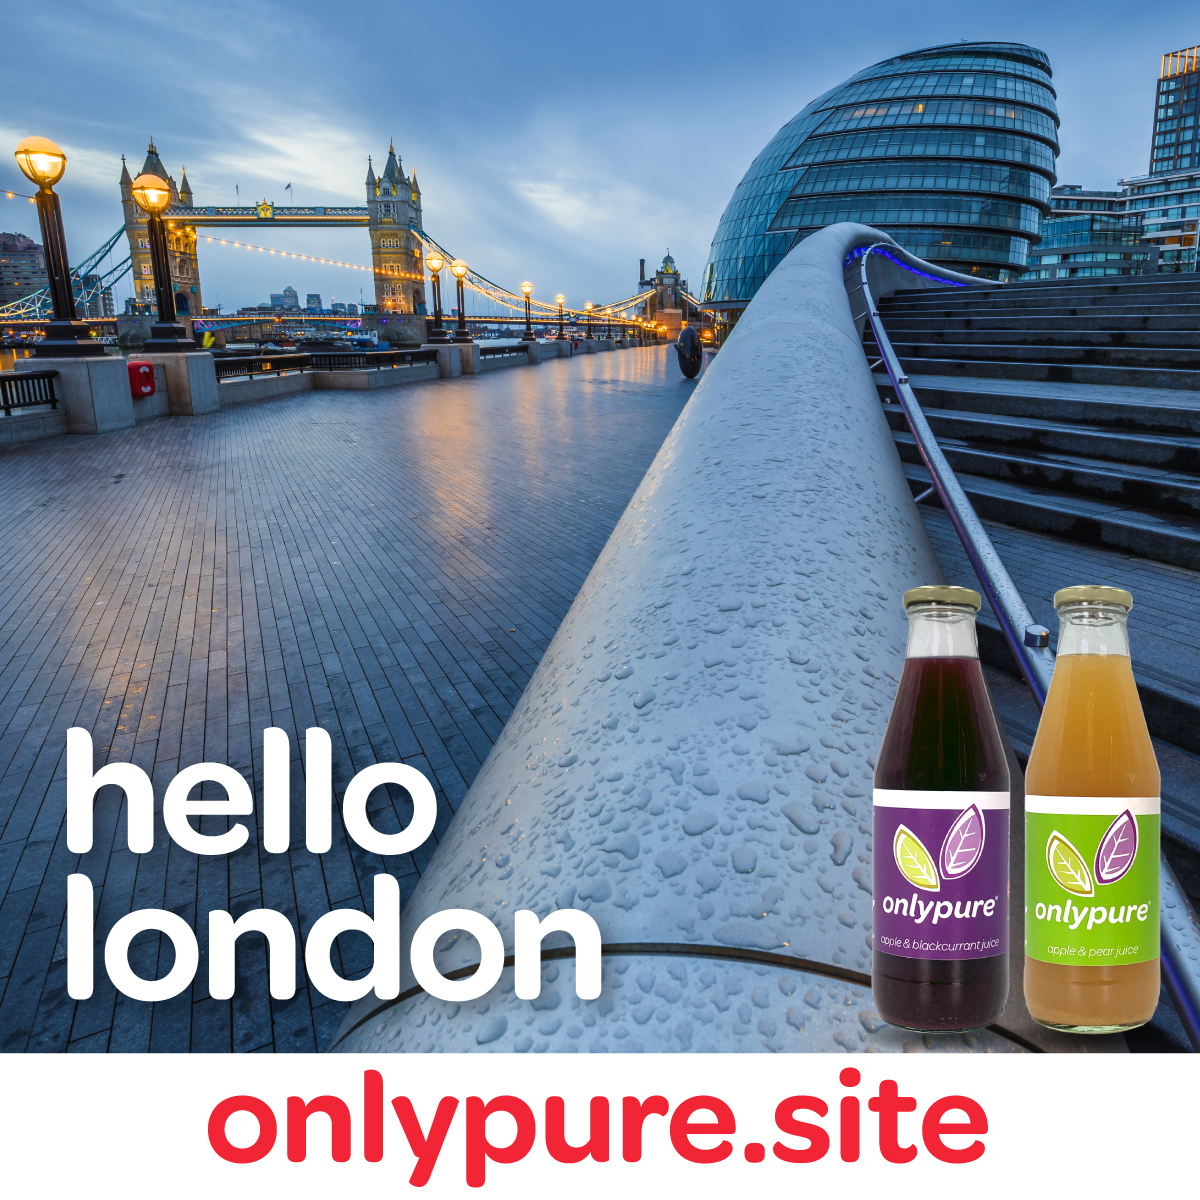 Hello London, introducing to you a great tasting and healthy new range of vegan friendly fruit juices. 
Take a look, visit onlypure.site

#london #londonlife #londoneye #londoncity #londoneats #londonlifestyle #secretlondon #explorelondon #londoncitylife #discoverlondon